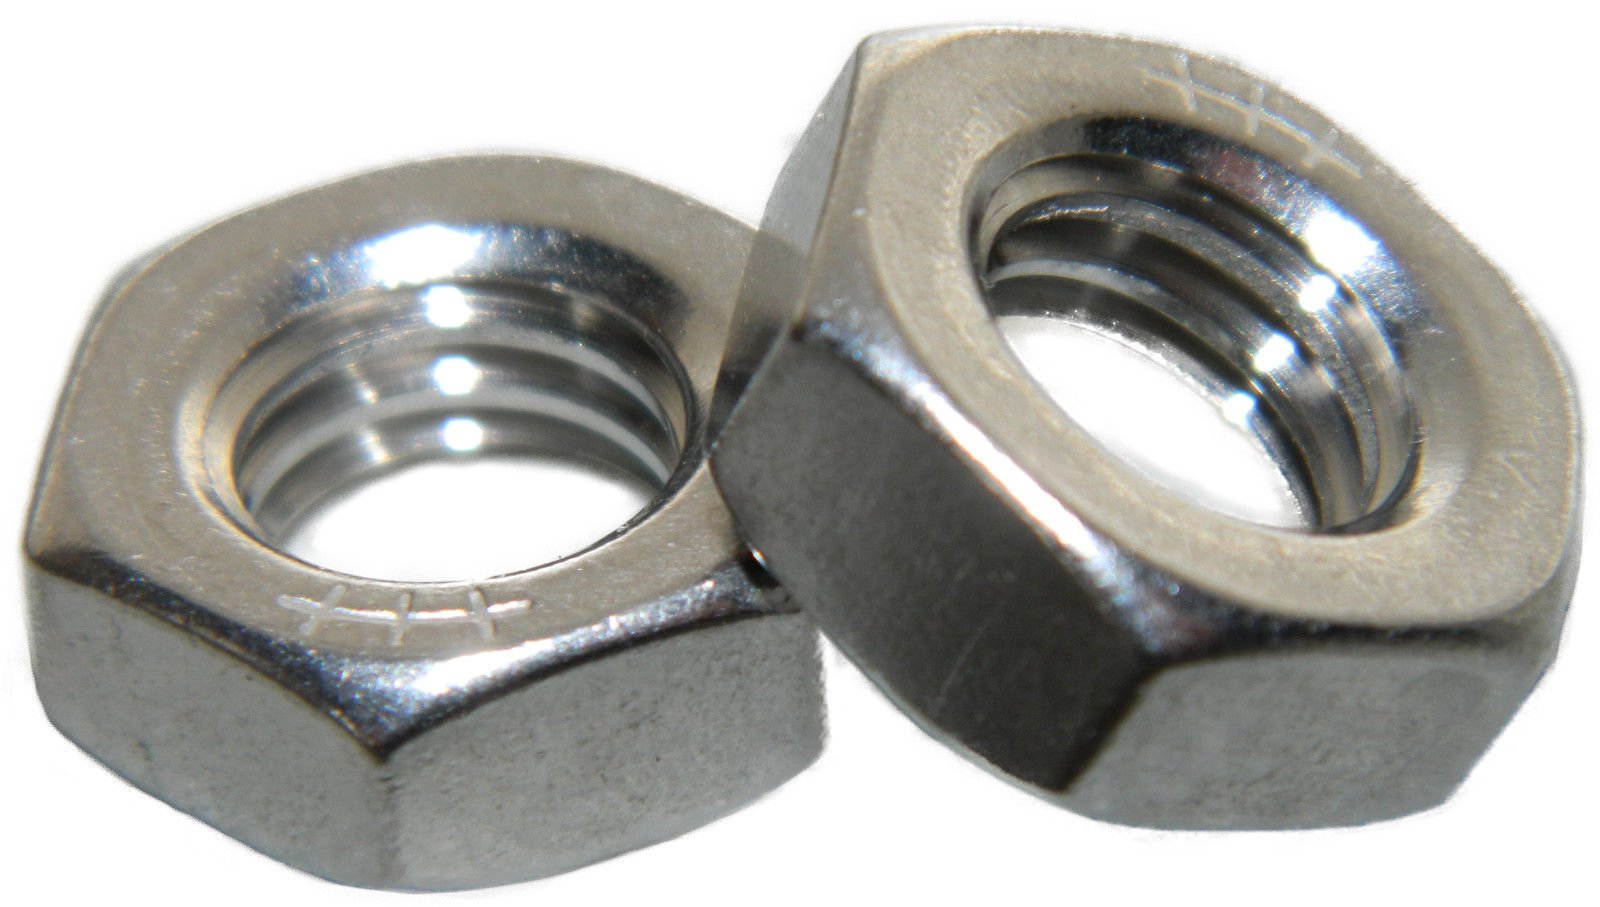 Stainless Steel thin jam half height Hex Nuts 1/4-20 Qty 25